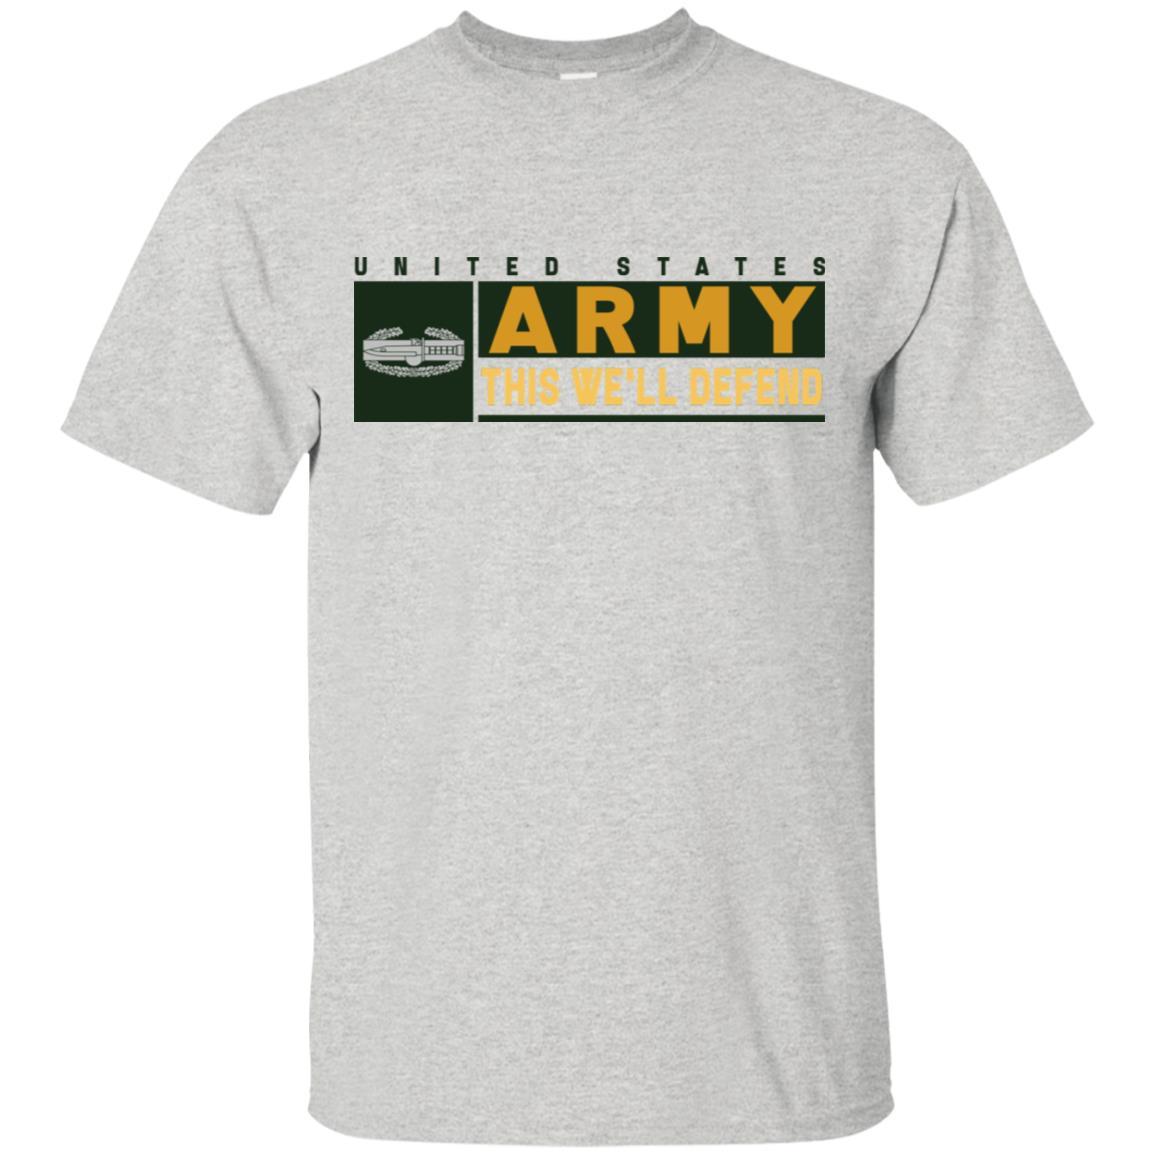 US Army Combat Action Badge- This We'll Defend T-Shirt On Front For Men-TShirt-Army-Veterans Nation